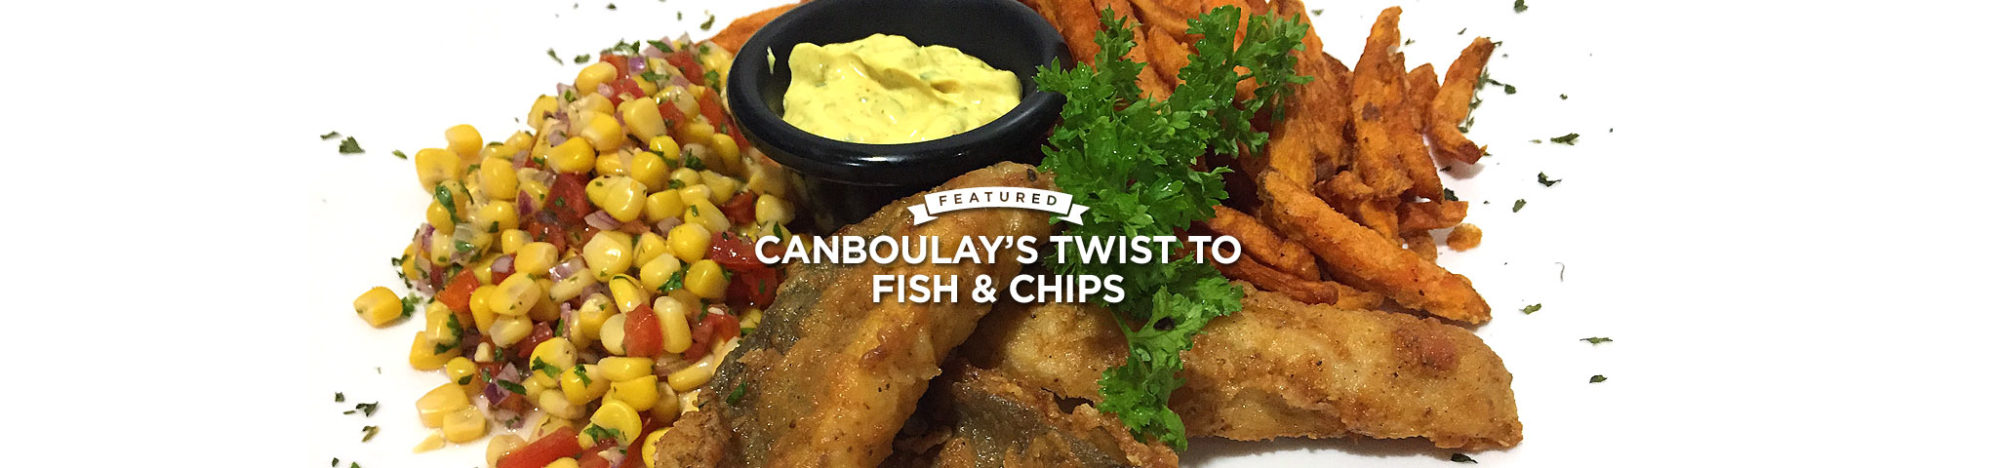 Canboulay's twist to Fish and Chips